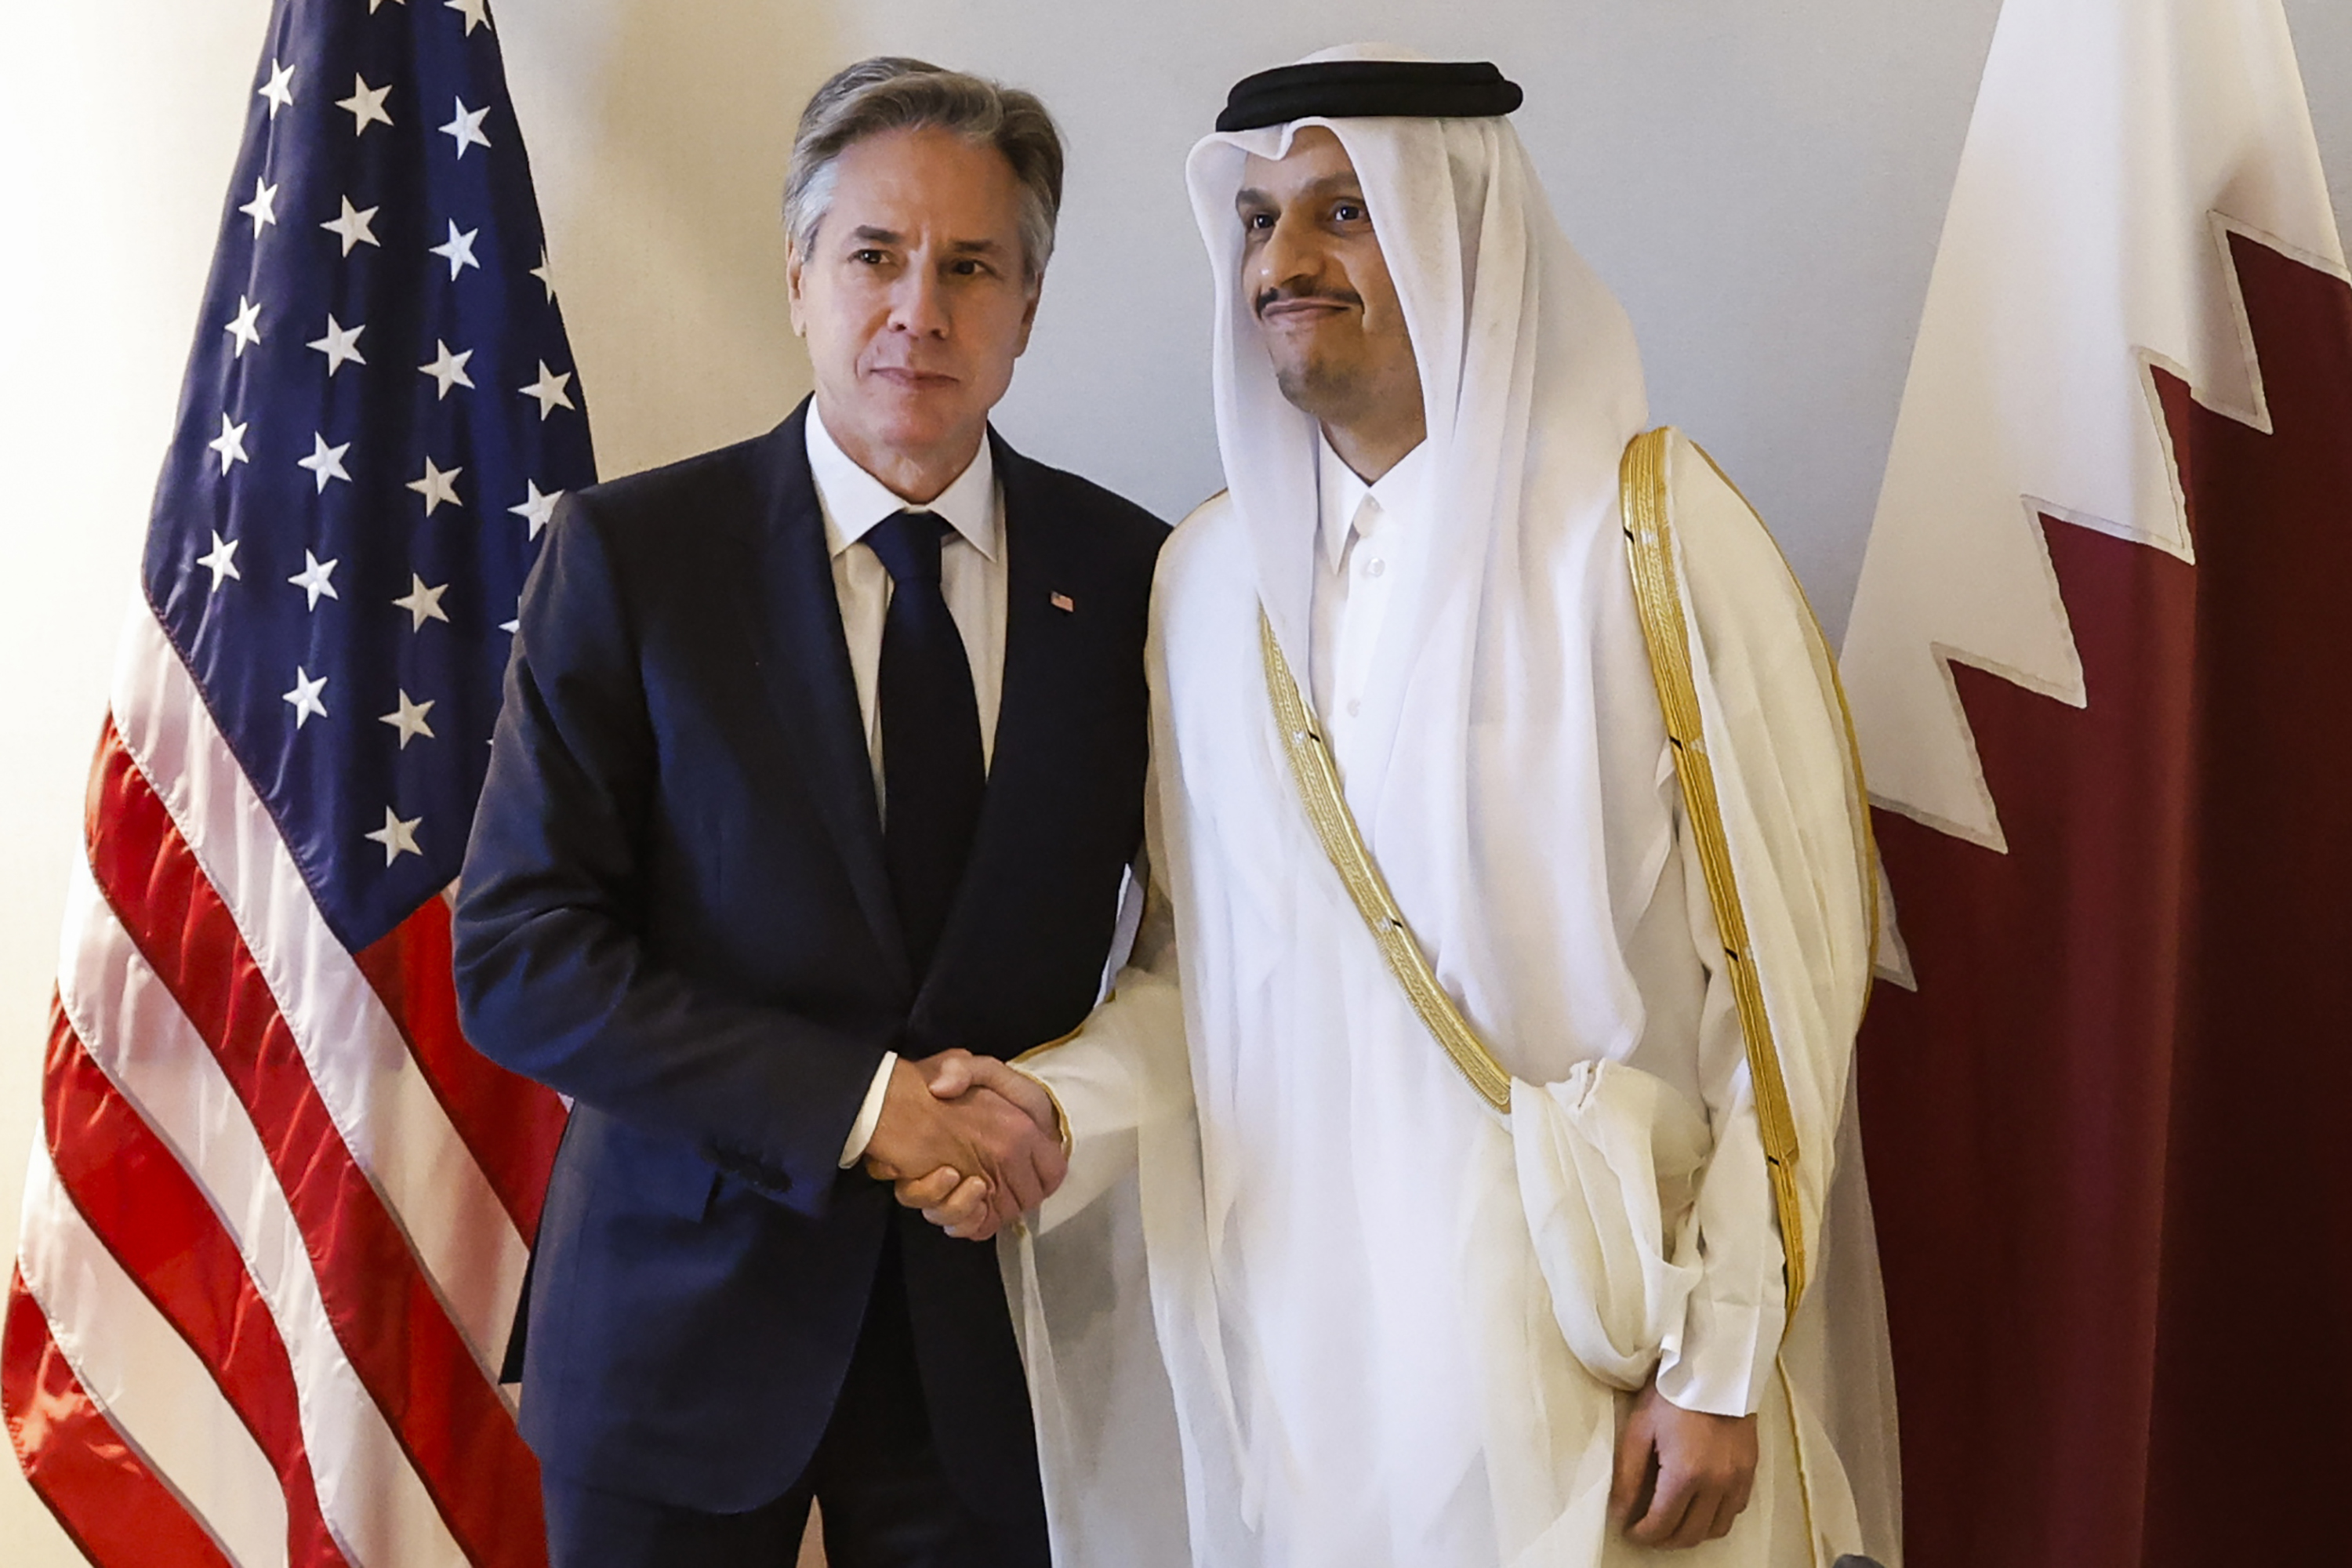 US Secretary of State Antony Blinken, left, meets with Qatari Prime Minister and Minister of Foreign Affairs Mohammed bin Abdulrahman Al Thani at a hotel during a day of meeting, in Amman, Jordan, on Saturday, November 4.